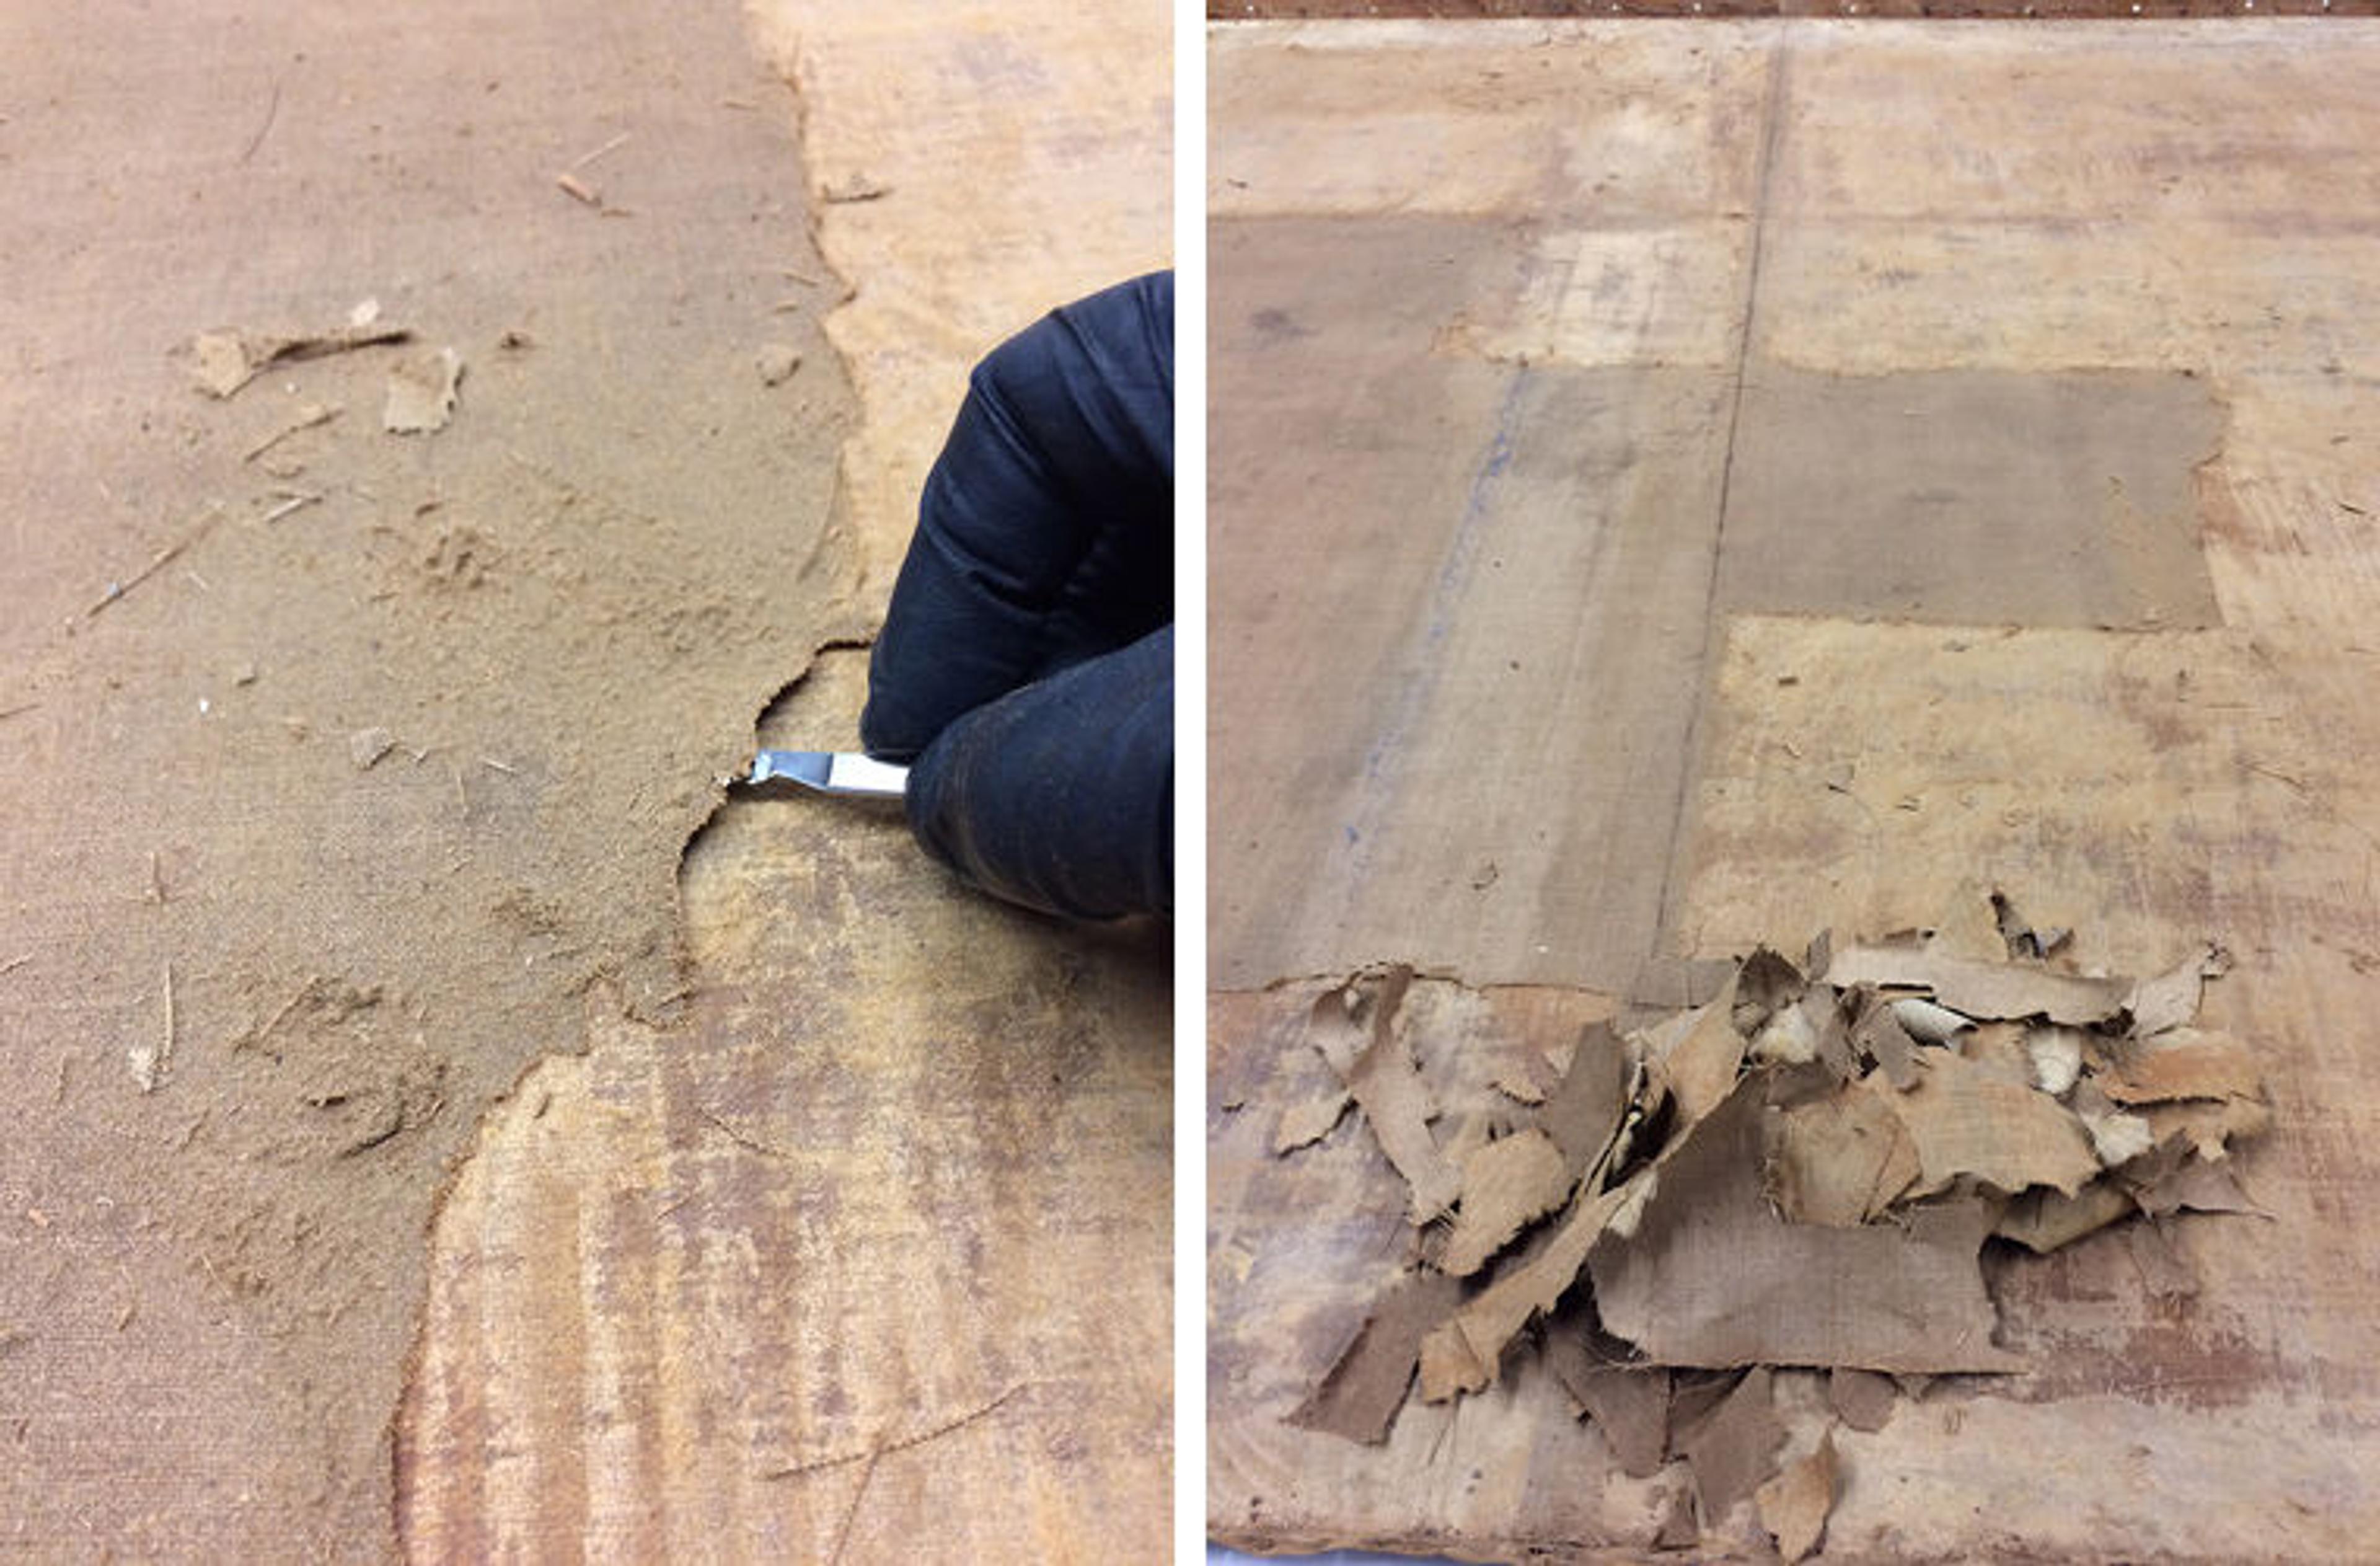 Two views of conservation treatment for a painting involving scraping away canvas lining